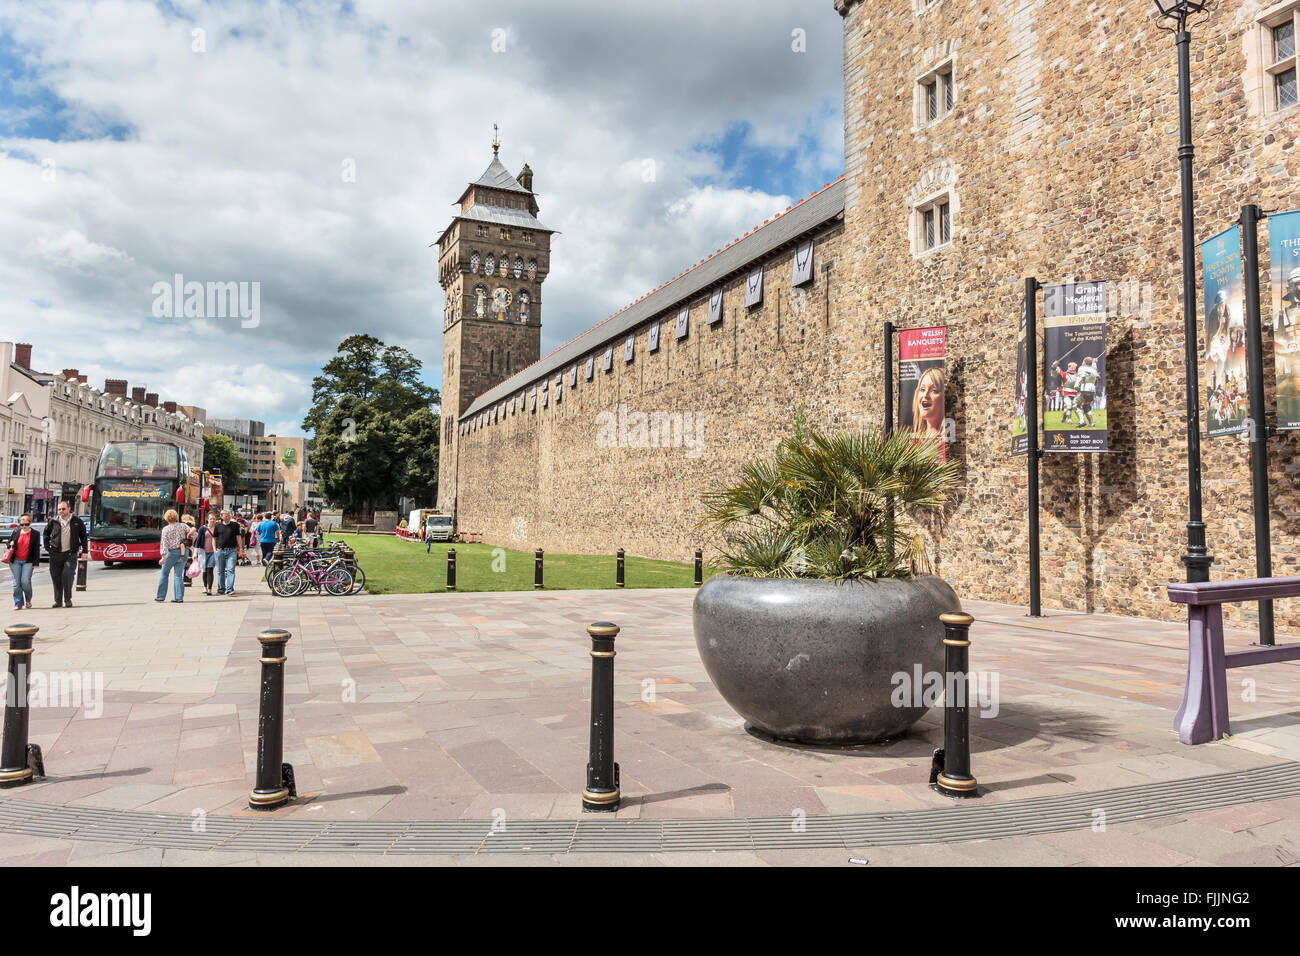 Entrance to Cardiff Castle, Caerdydd, looking towards clock tower and the River Taff from Castle Street. Stock Photo